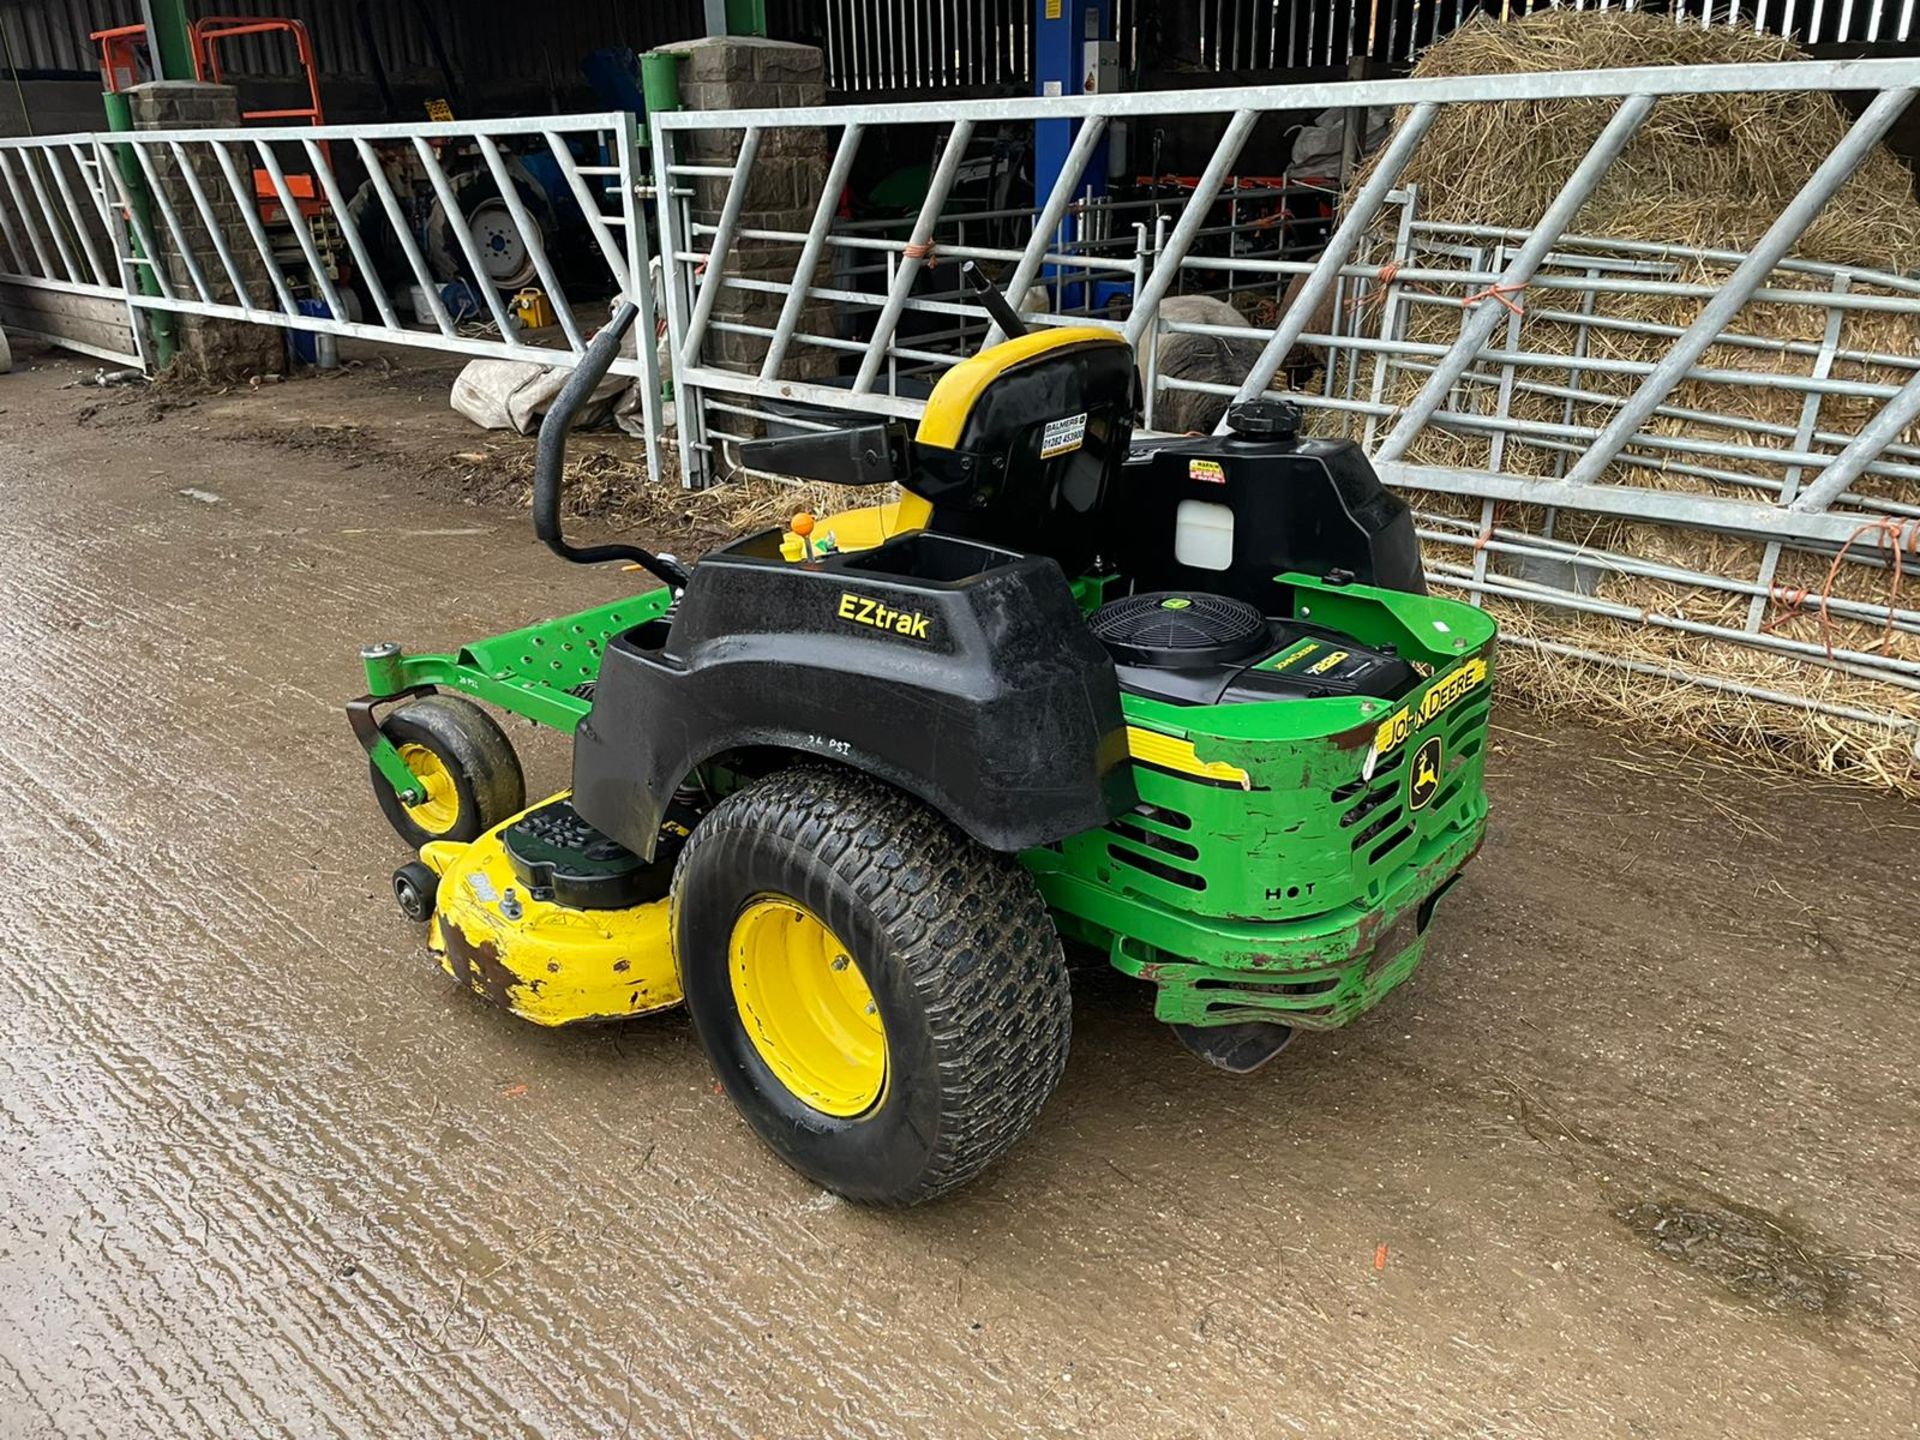 2014 JOHN DEERE Z435 ZERO TURN MOWER, SOLD NEW IN 2015, RUNS, DRIVES AND CUTS, GOOD CONDITION - Image 4 of 8